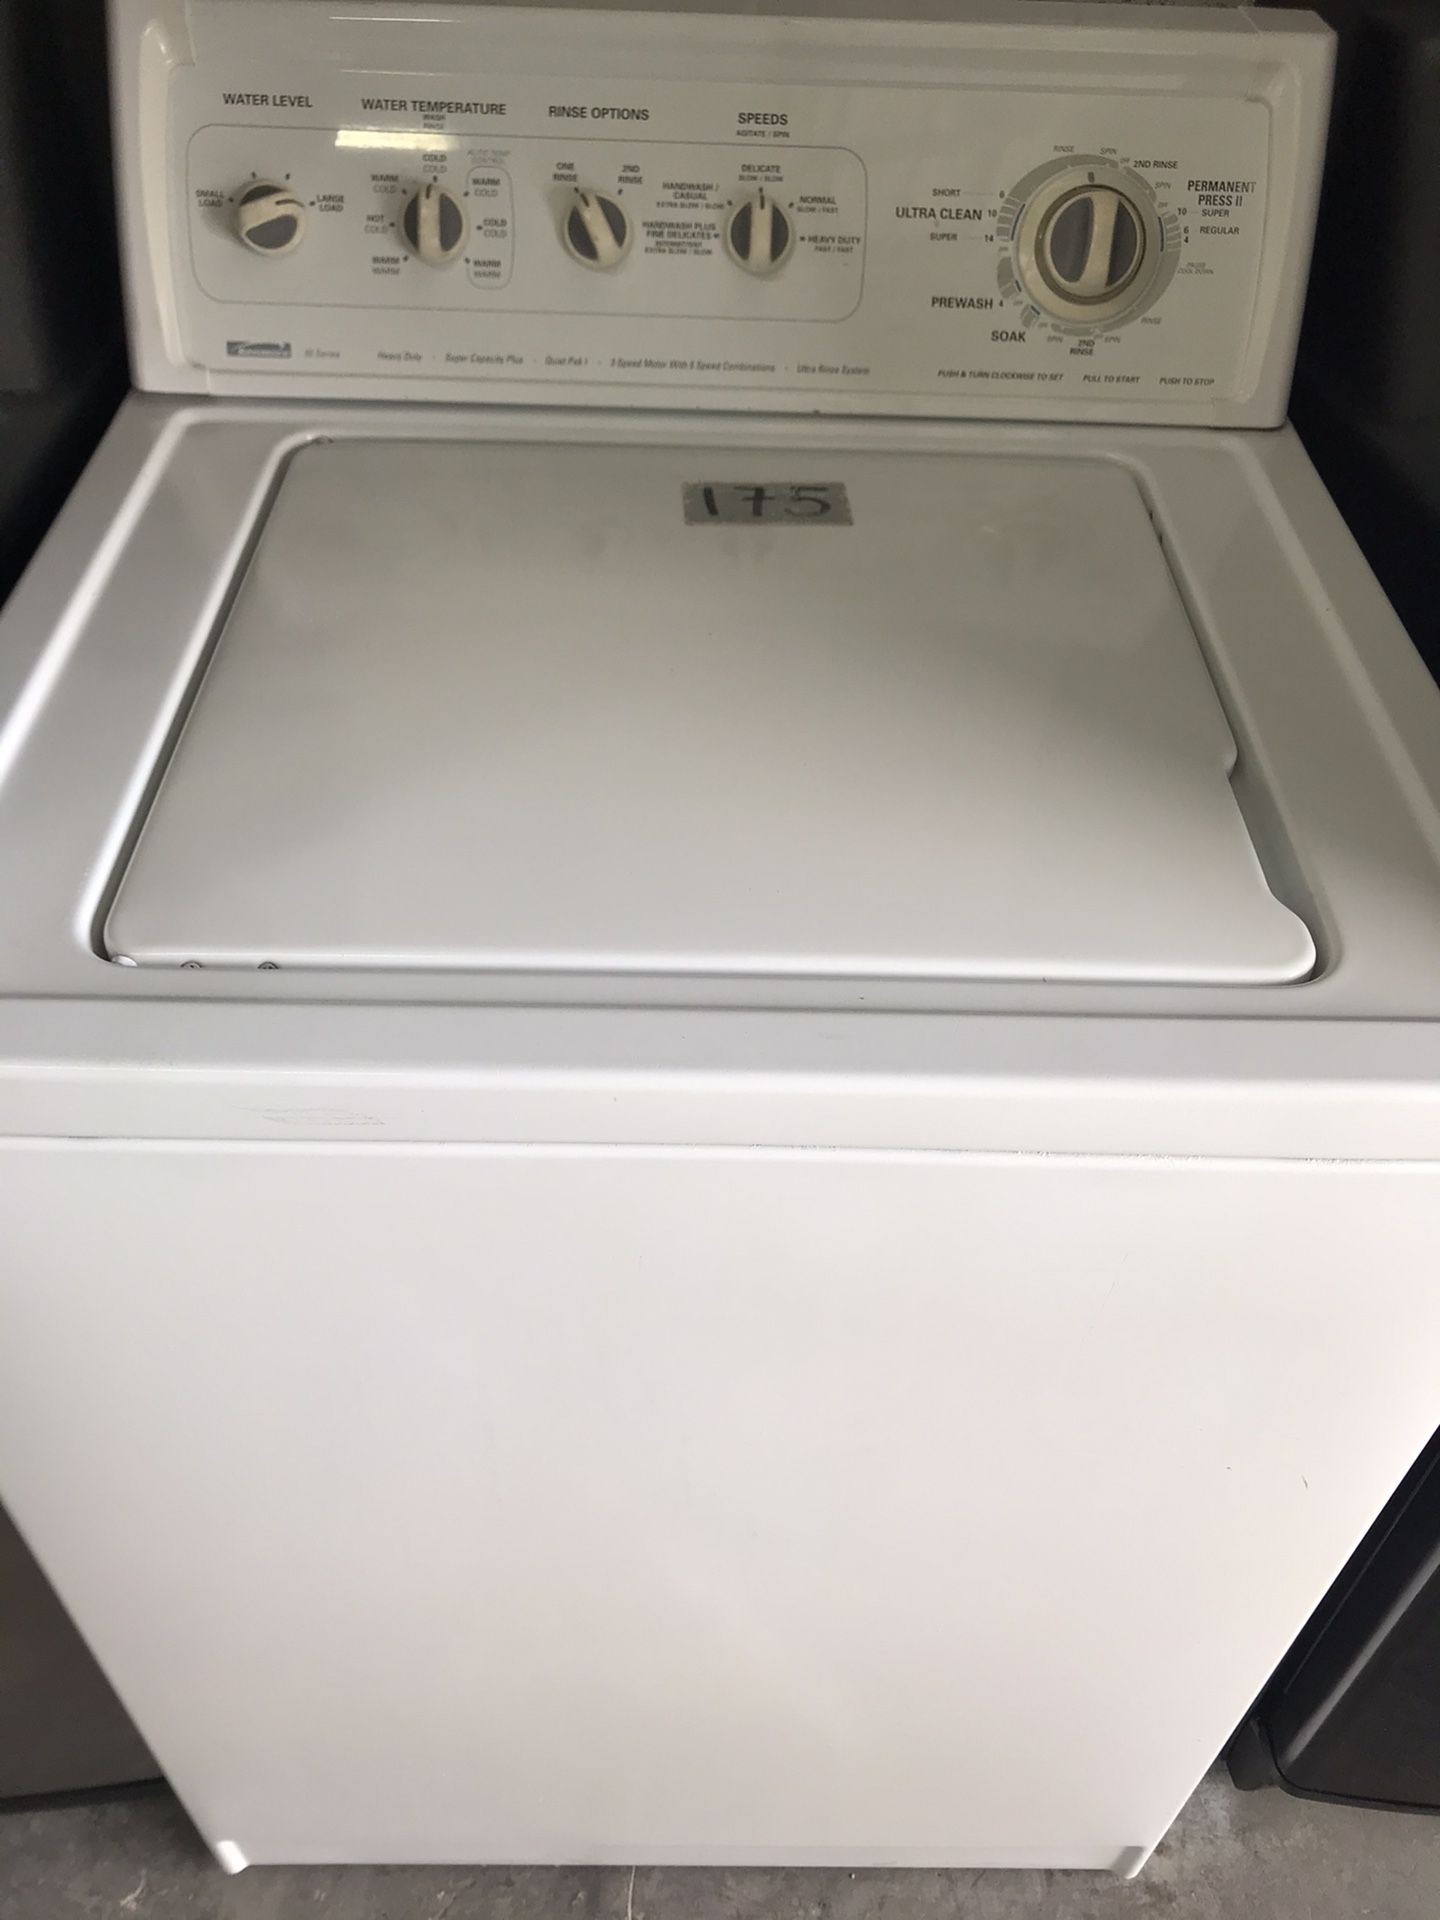 Kenmore white washer heavy duty capacity in excellent condition plus 6 months warranty. Delivery service available